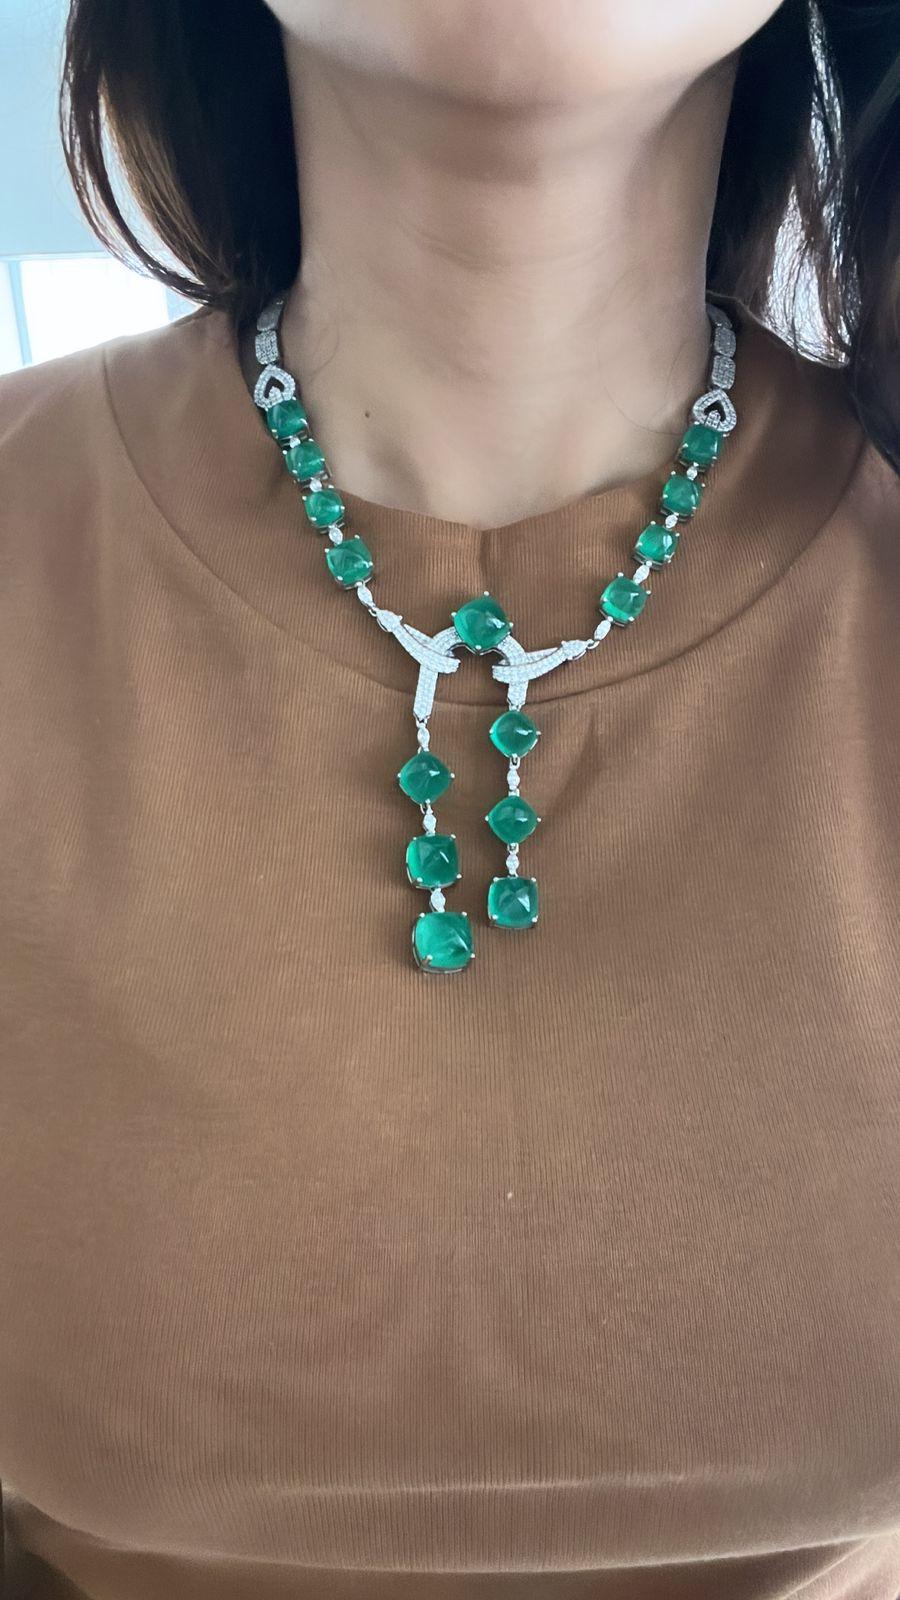 A very gorgeous and one of a kind, Emerald Drop Necklace set in 18K White Gold & Diamonds. The weight of the Emerald Sugarloafs is 74.16 carats. The Emeralds are completely natural, without any treatment and are of Zambian origin. The weight of the